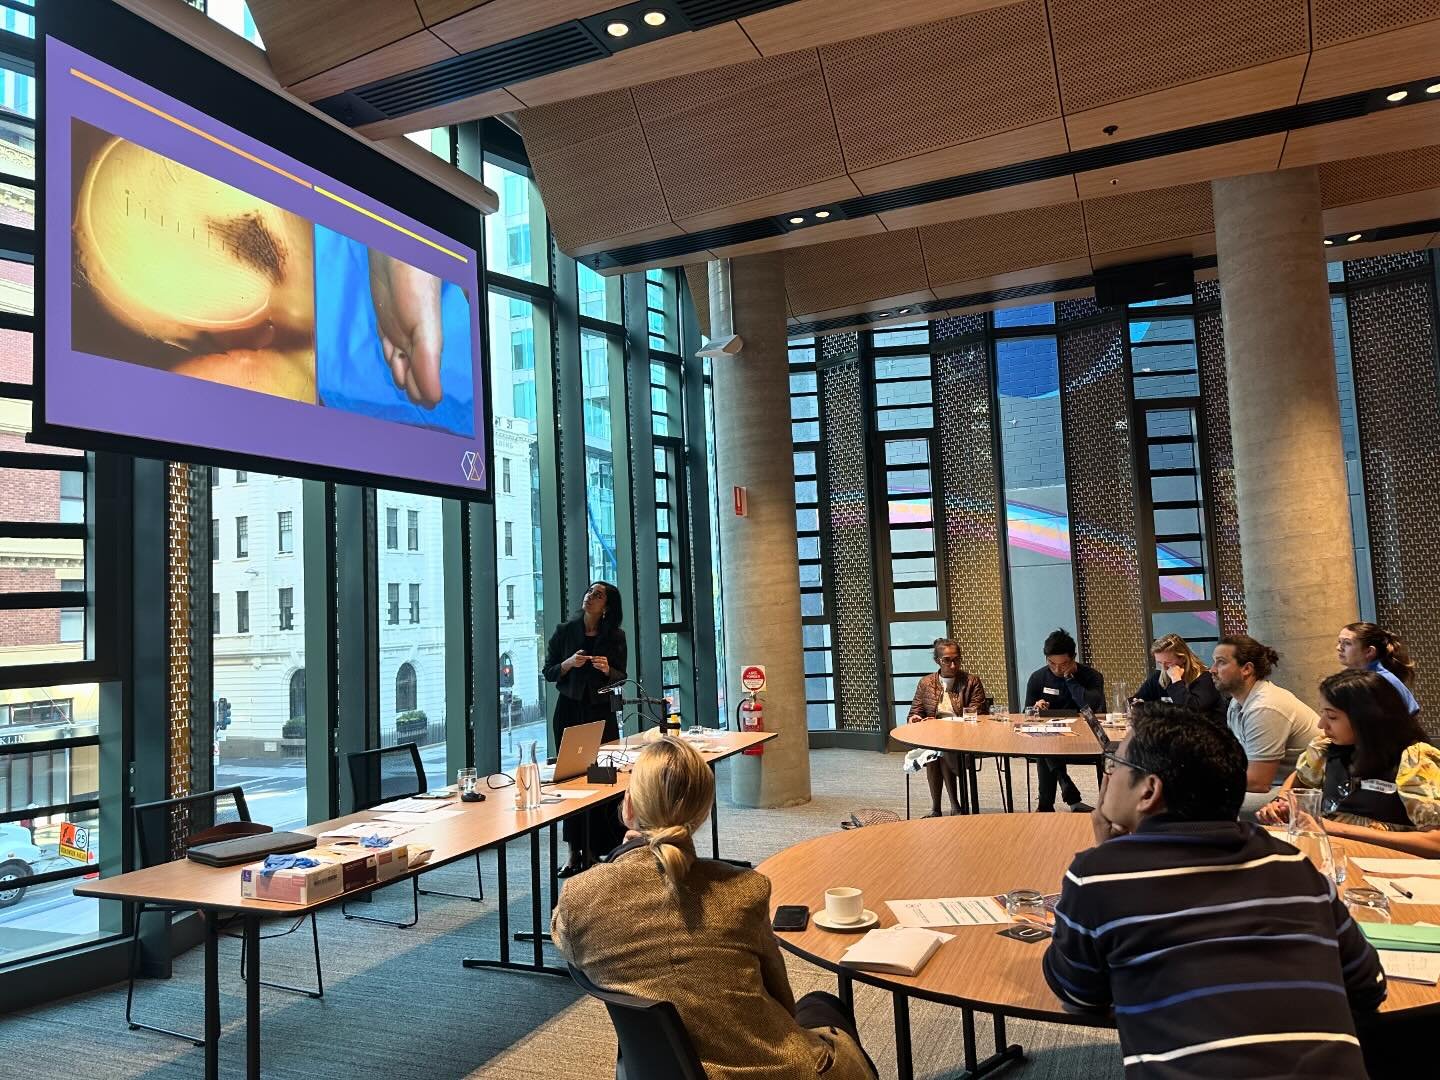 I had the pleasure of teaching a group of very engaged GPs about improving the accuracy of skin cancer diagnosis through dermoscopy as well as a practical workshop on skin surgical skills. 👩&zwj;⚕️👨&zwj;⚕️

The full day workshop was organised by @d